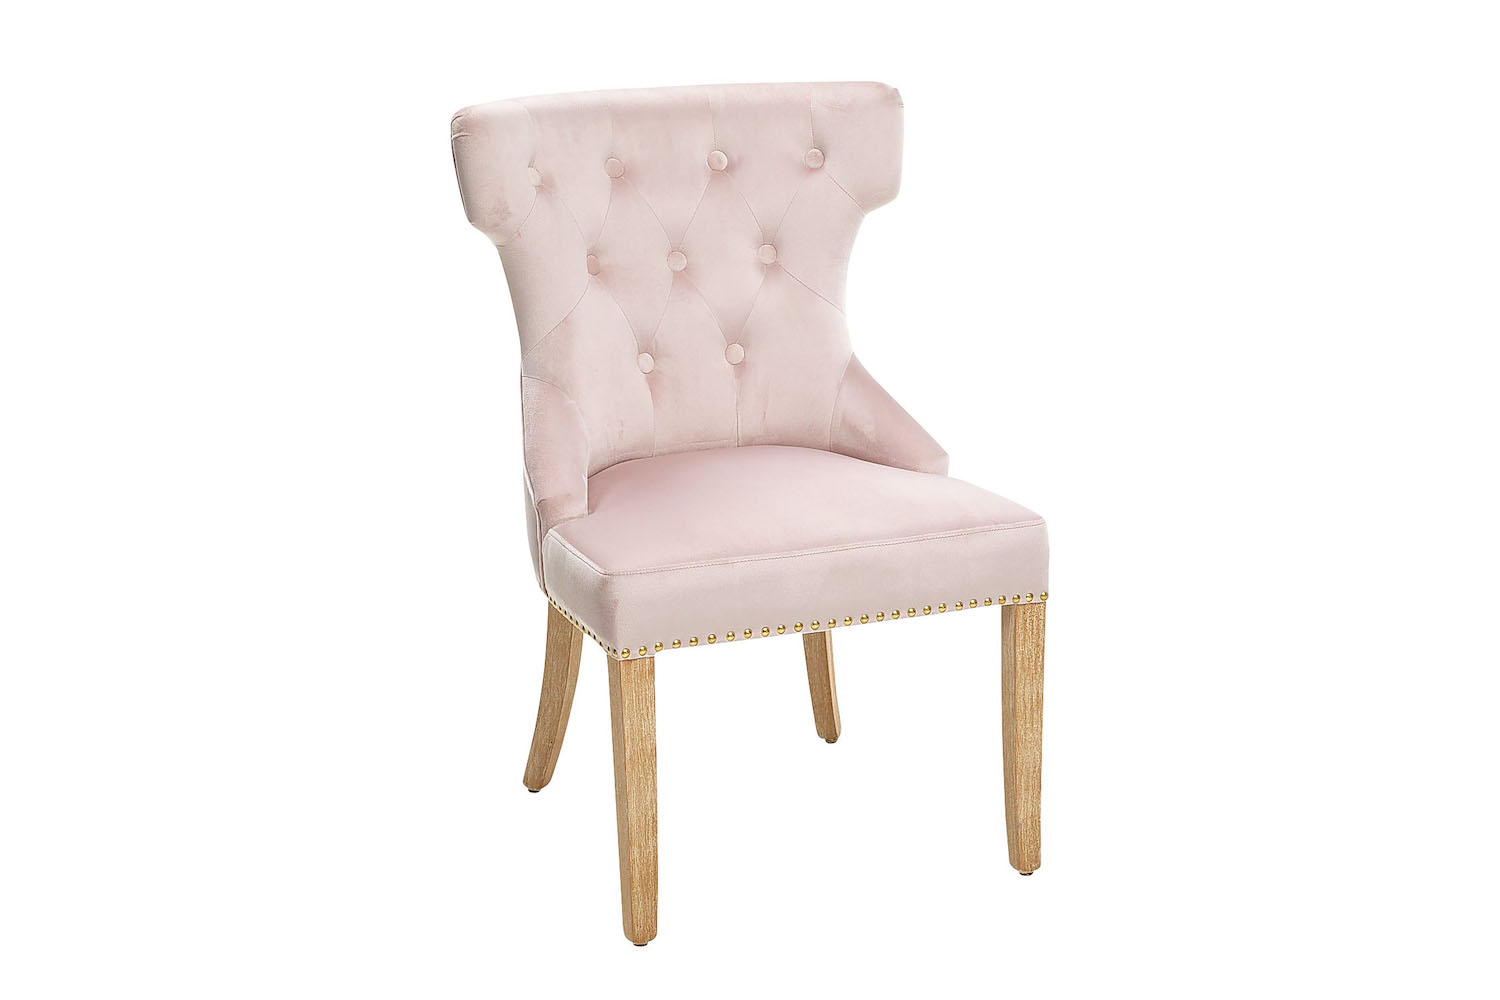 pier one audrey dining chair